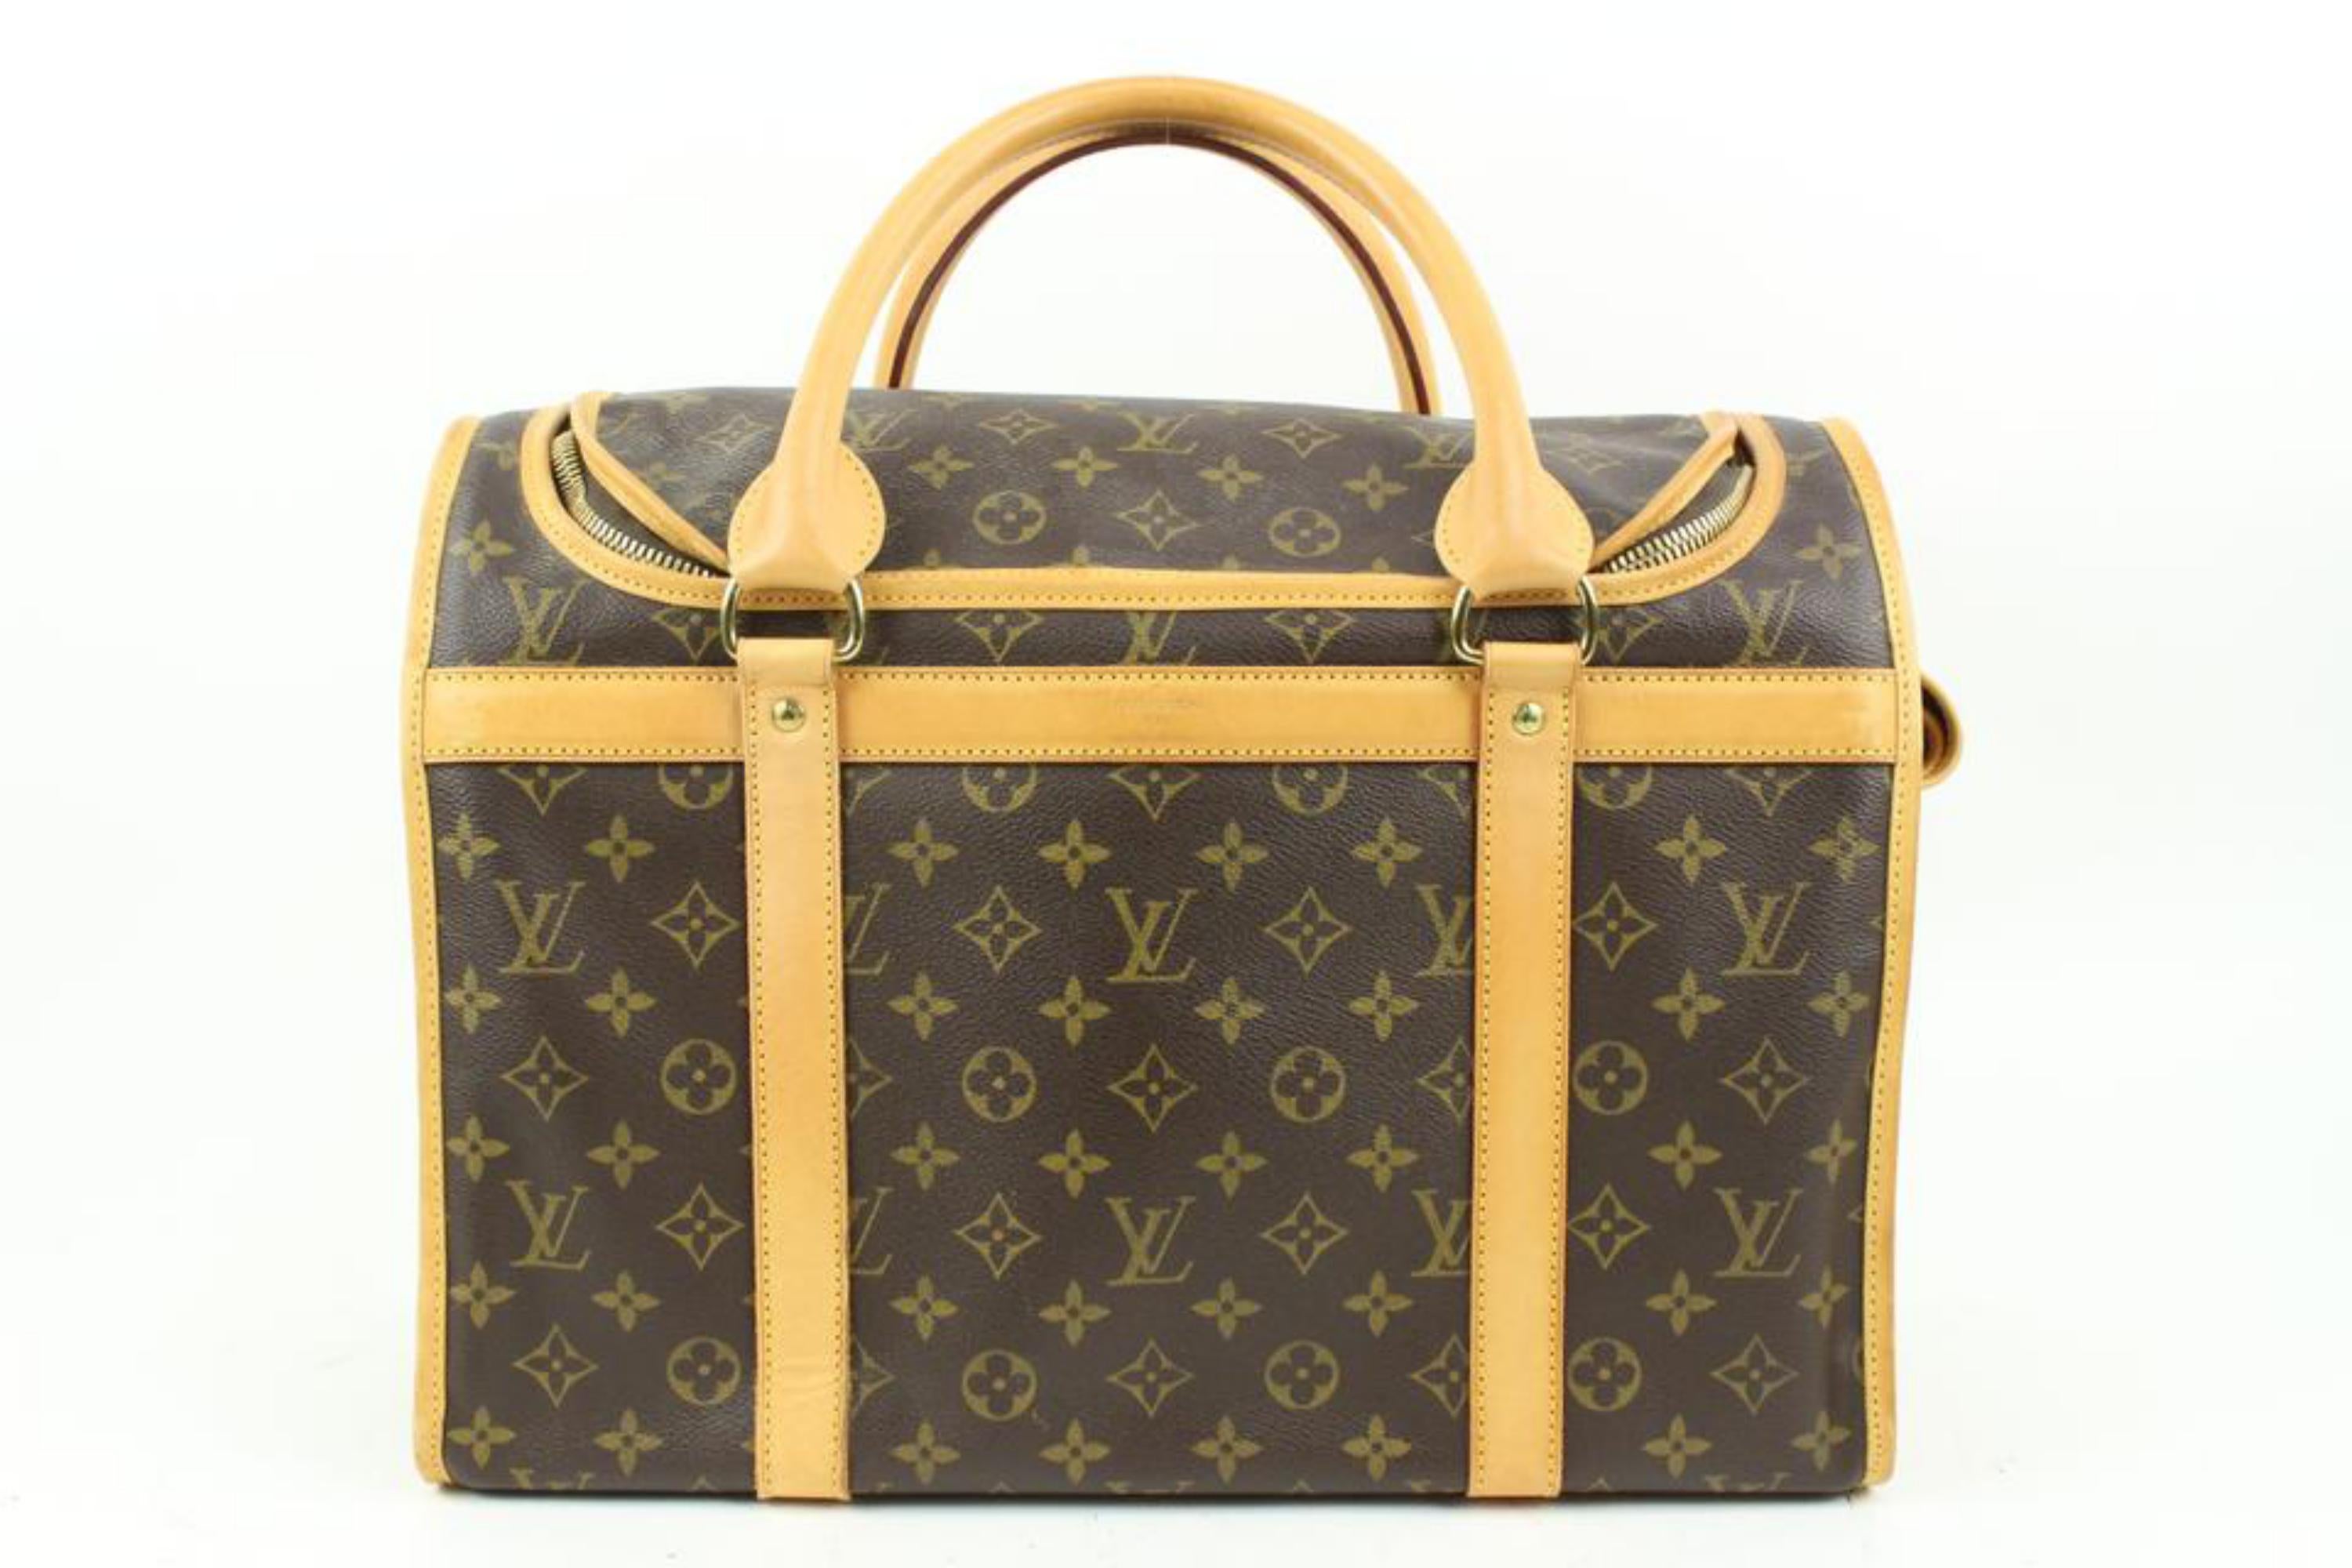 Louis Vuitton Monogram Pet Carrier 40 Sac Chien Dog Travel Bag 99lv215s
Date Code/Serial Number: SL1002
Made In: France
Measurements: Length:  15.5